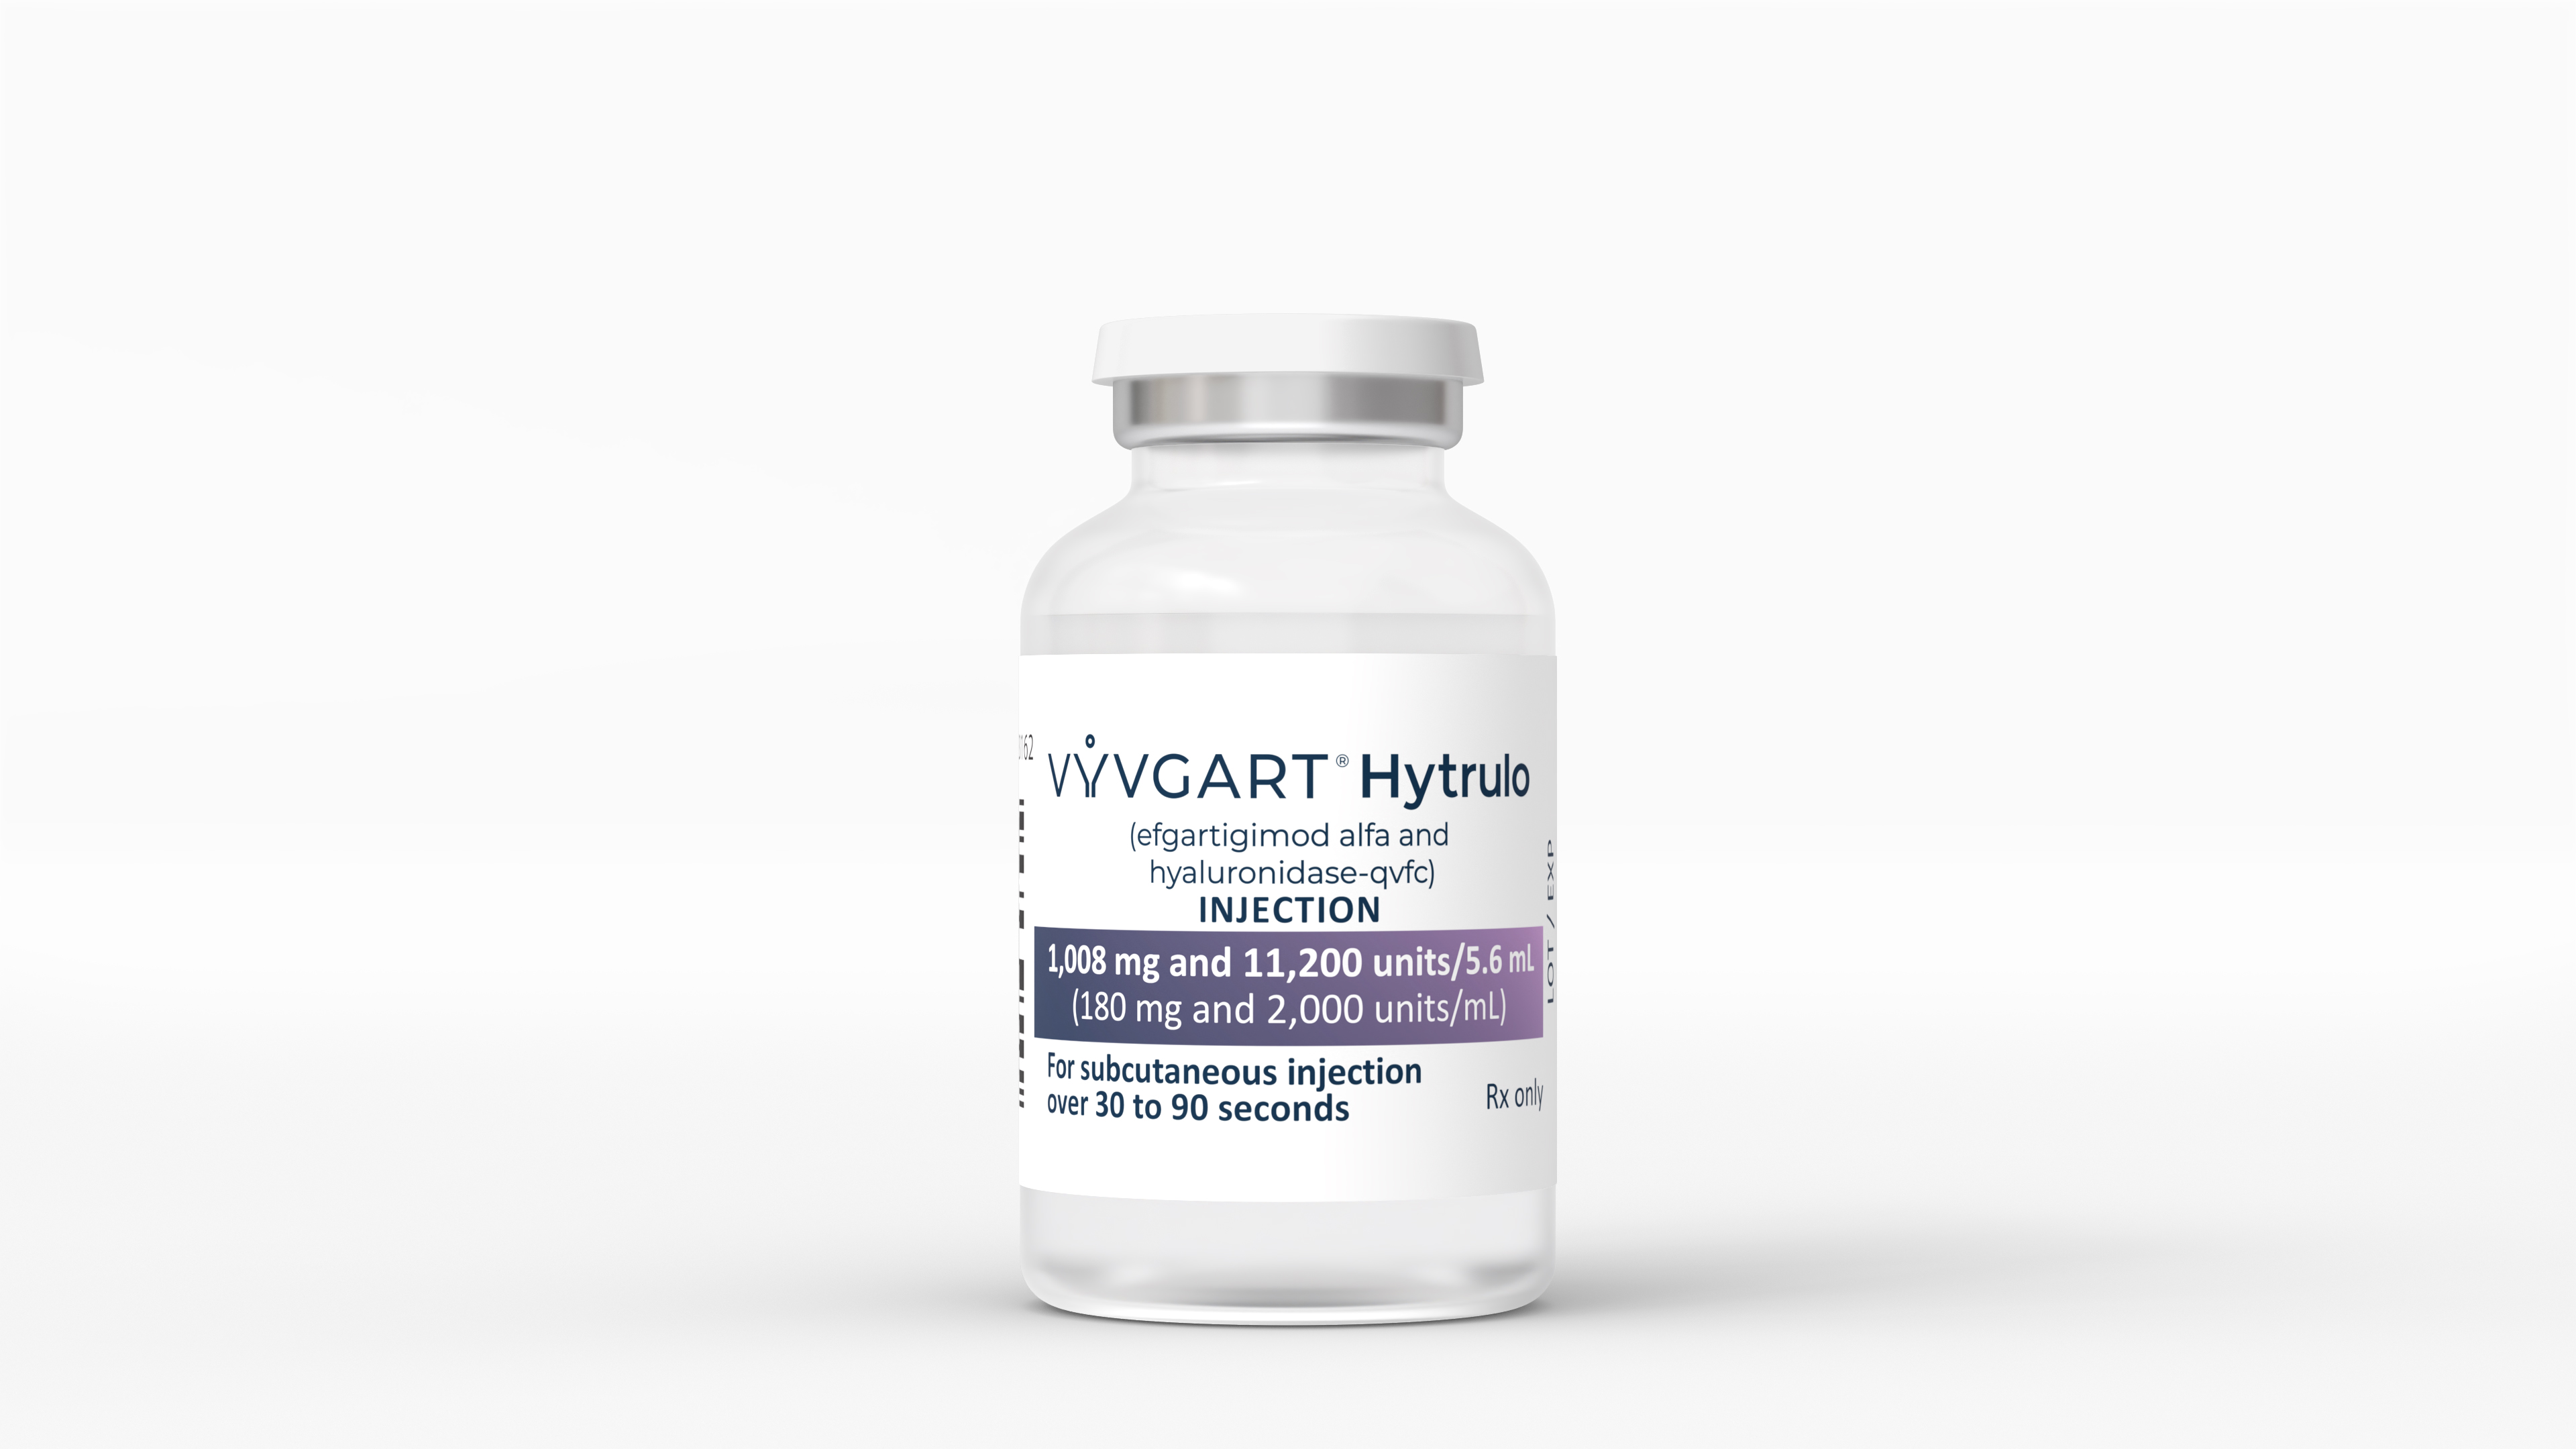 argenx Announces U.S. Food and Drug Administration Approval of VYVGART Hytrulo (efgartigimod alfa and hyaluronidase-qvfc) Injection for Subcutaneous Use in Generalized Myasthenia Gravis